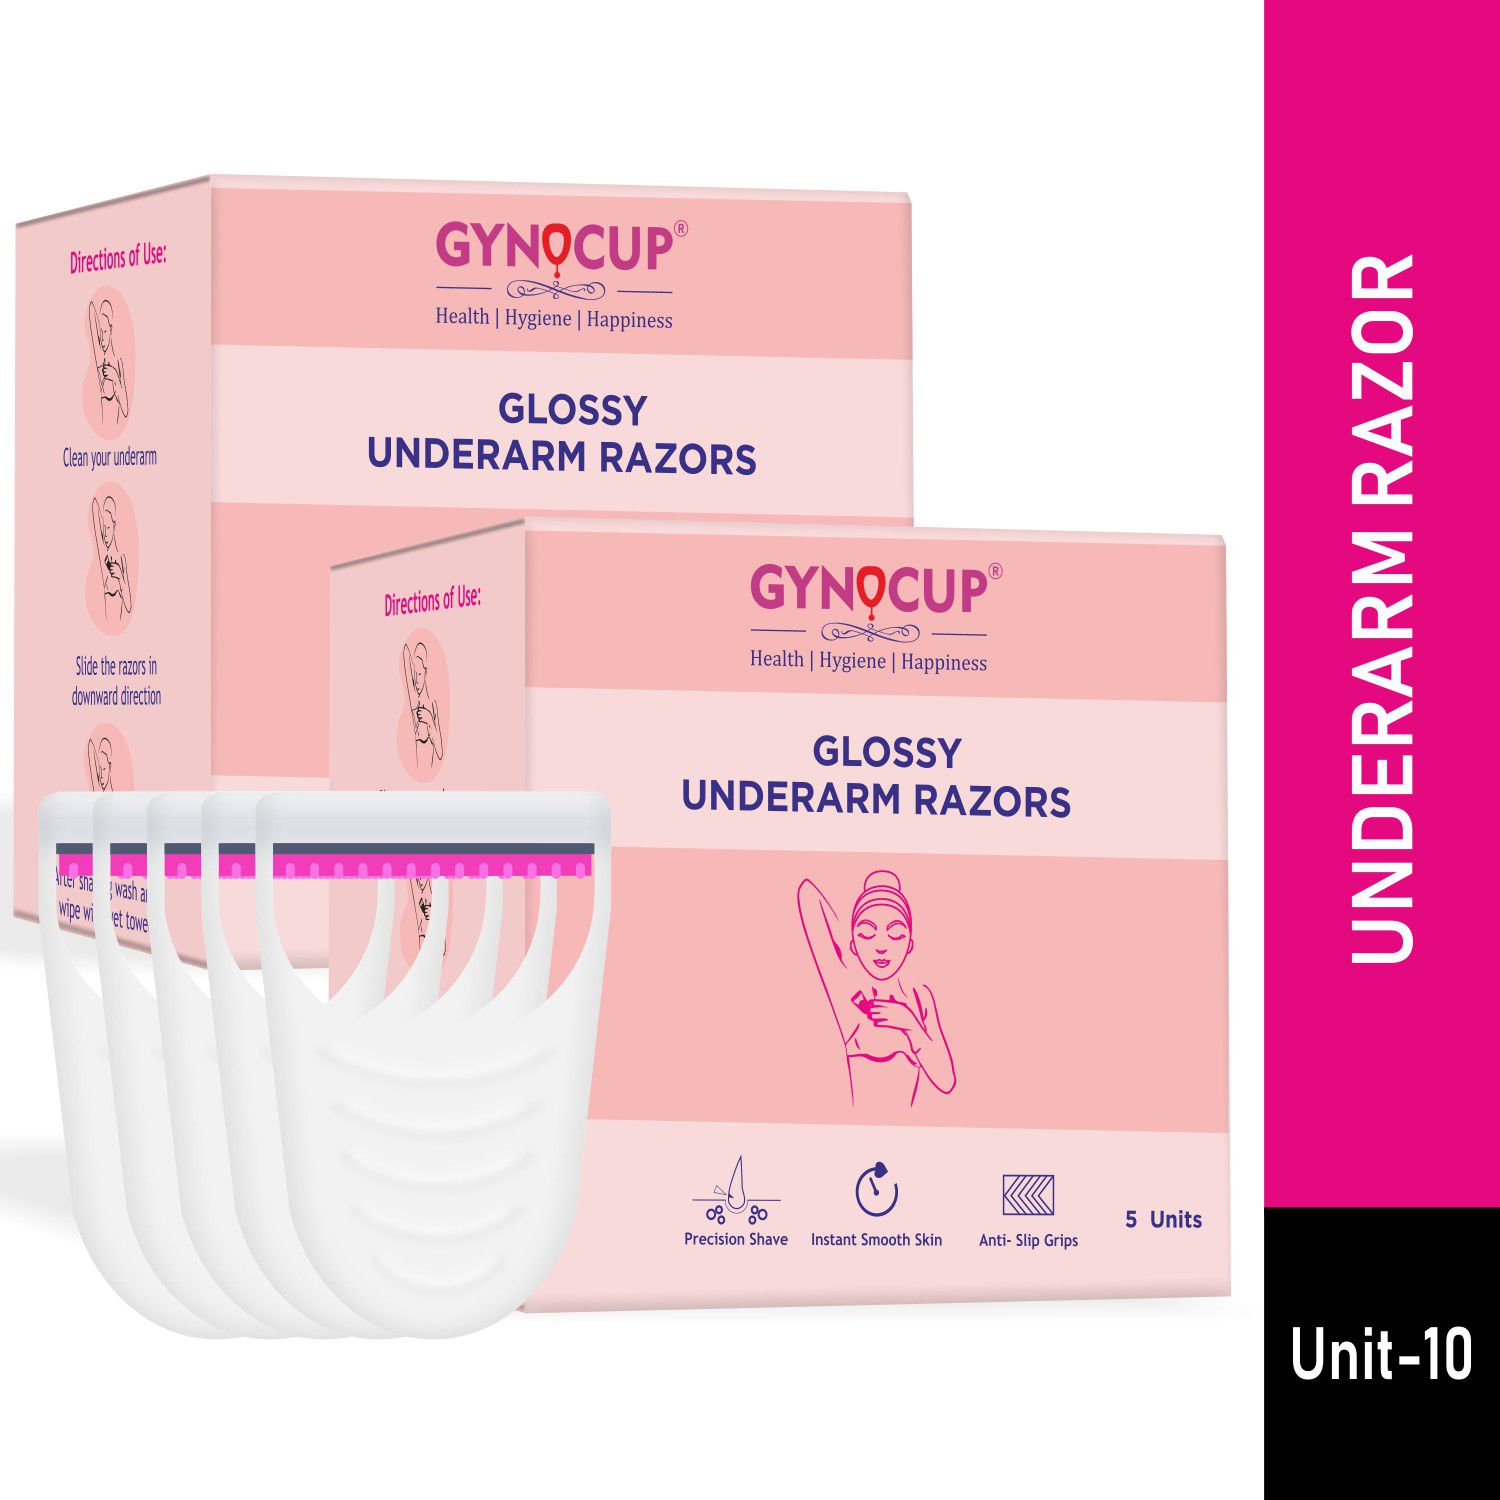 Gynocup Underarm Hair Remove Razor|Easy to use|No Cut Safe & Comfortable  Shaving|Water Resist (Set of 10): Buy Gynocup Underarm Hair Remove  Razor|Easy to use|No Cut Safe & Comfortable Shaving|Water Resist (Set of